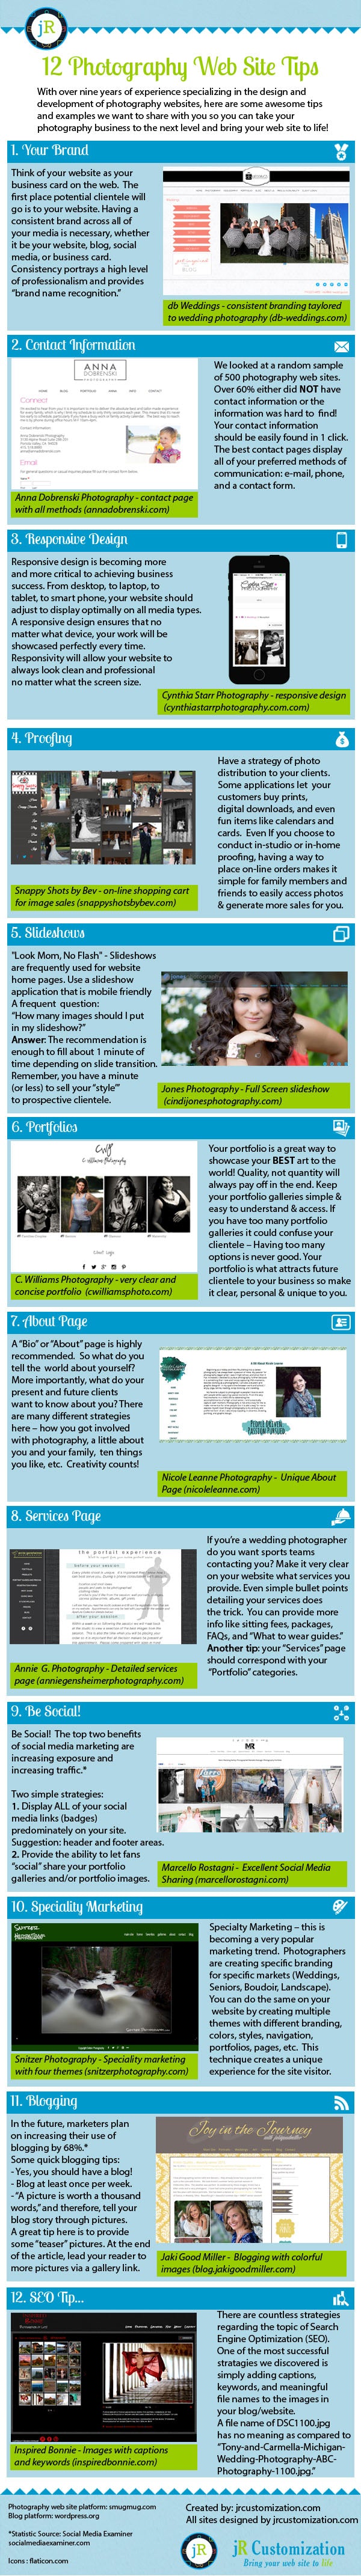 Photography Website Tips - Infographic